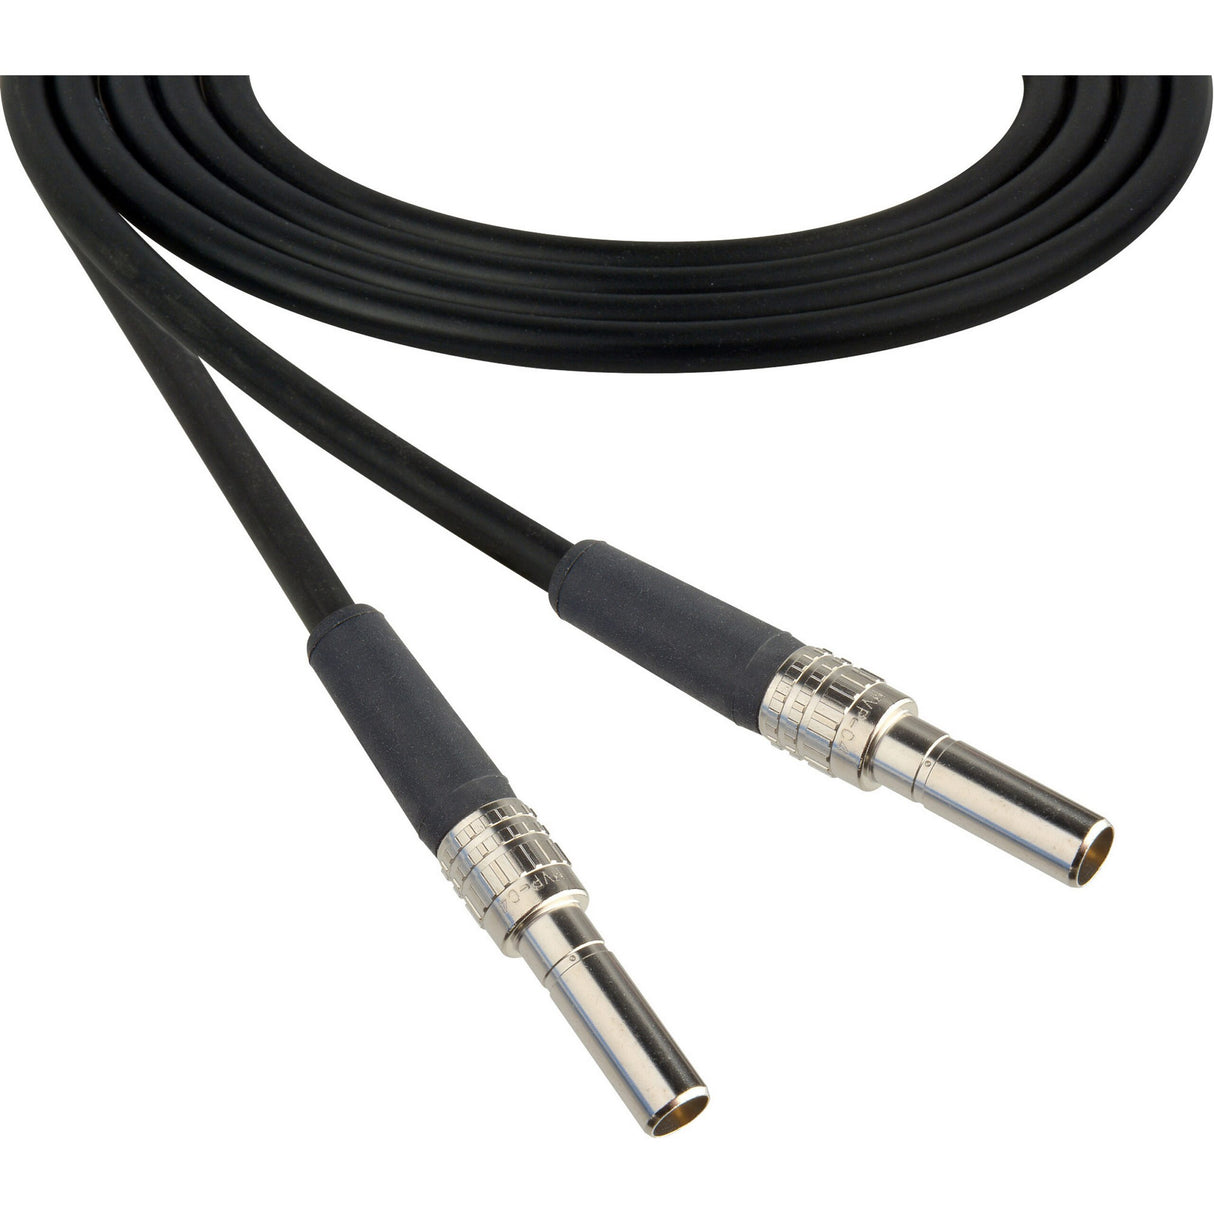 Laird MVP-MVP-BK24 L-4CFB Mid-Size Mini-WECO Male to Male Patch Cable, 2-Foot